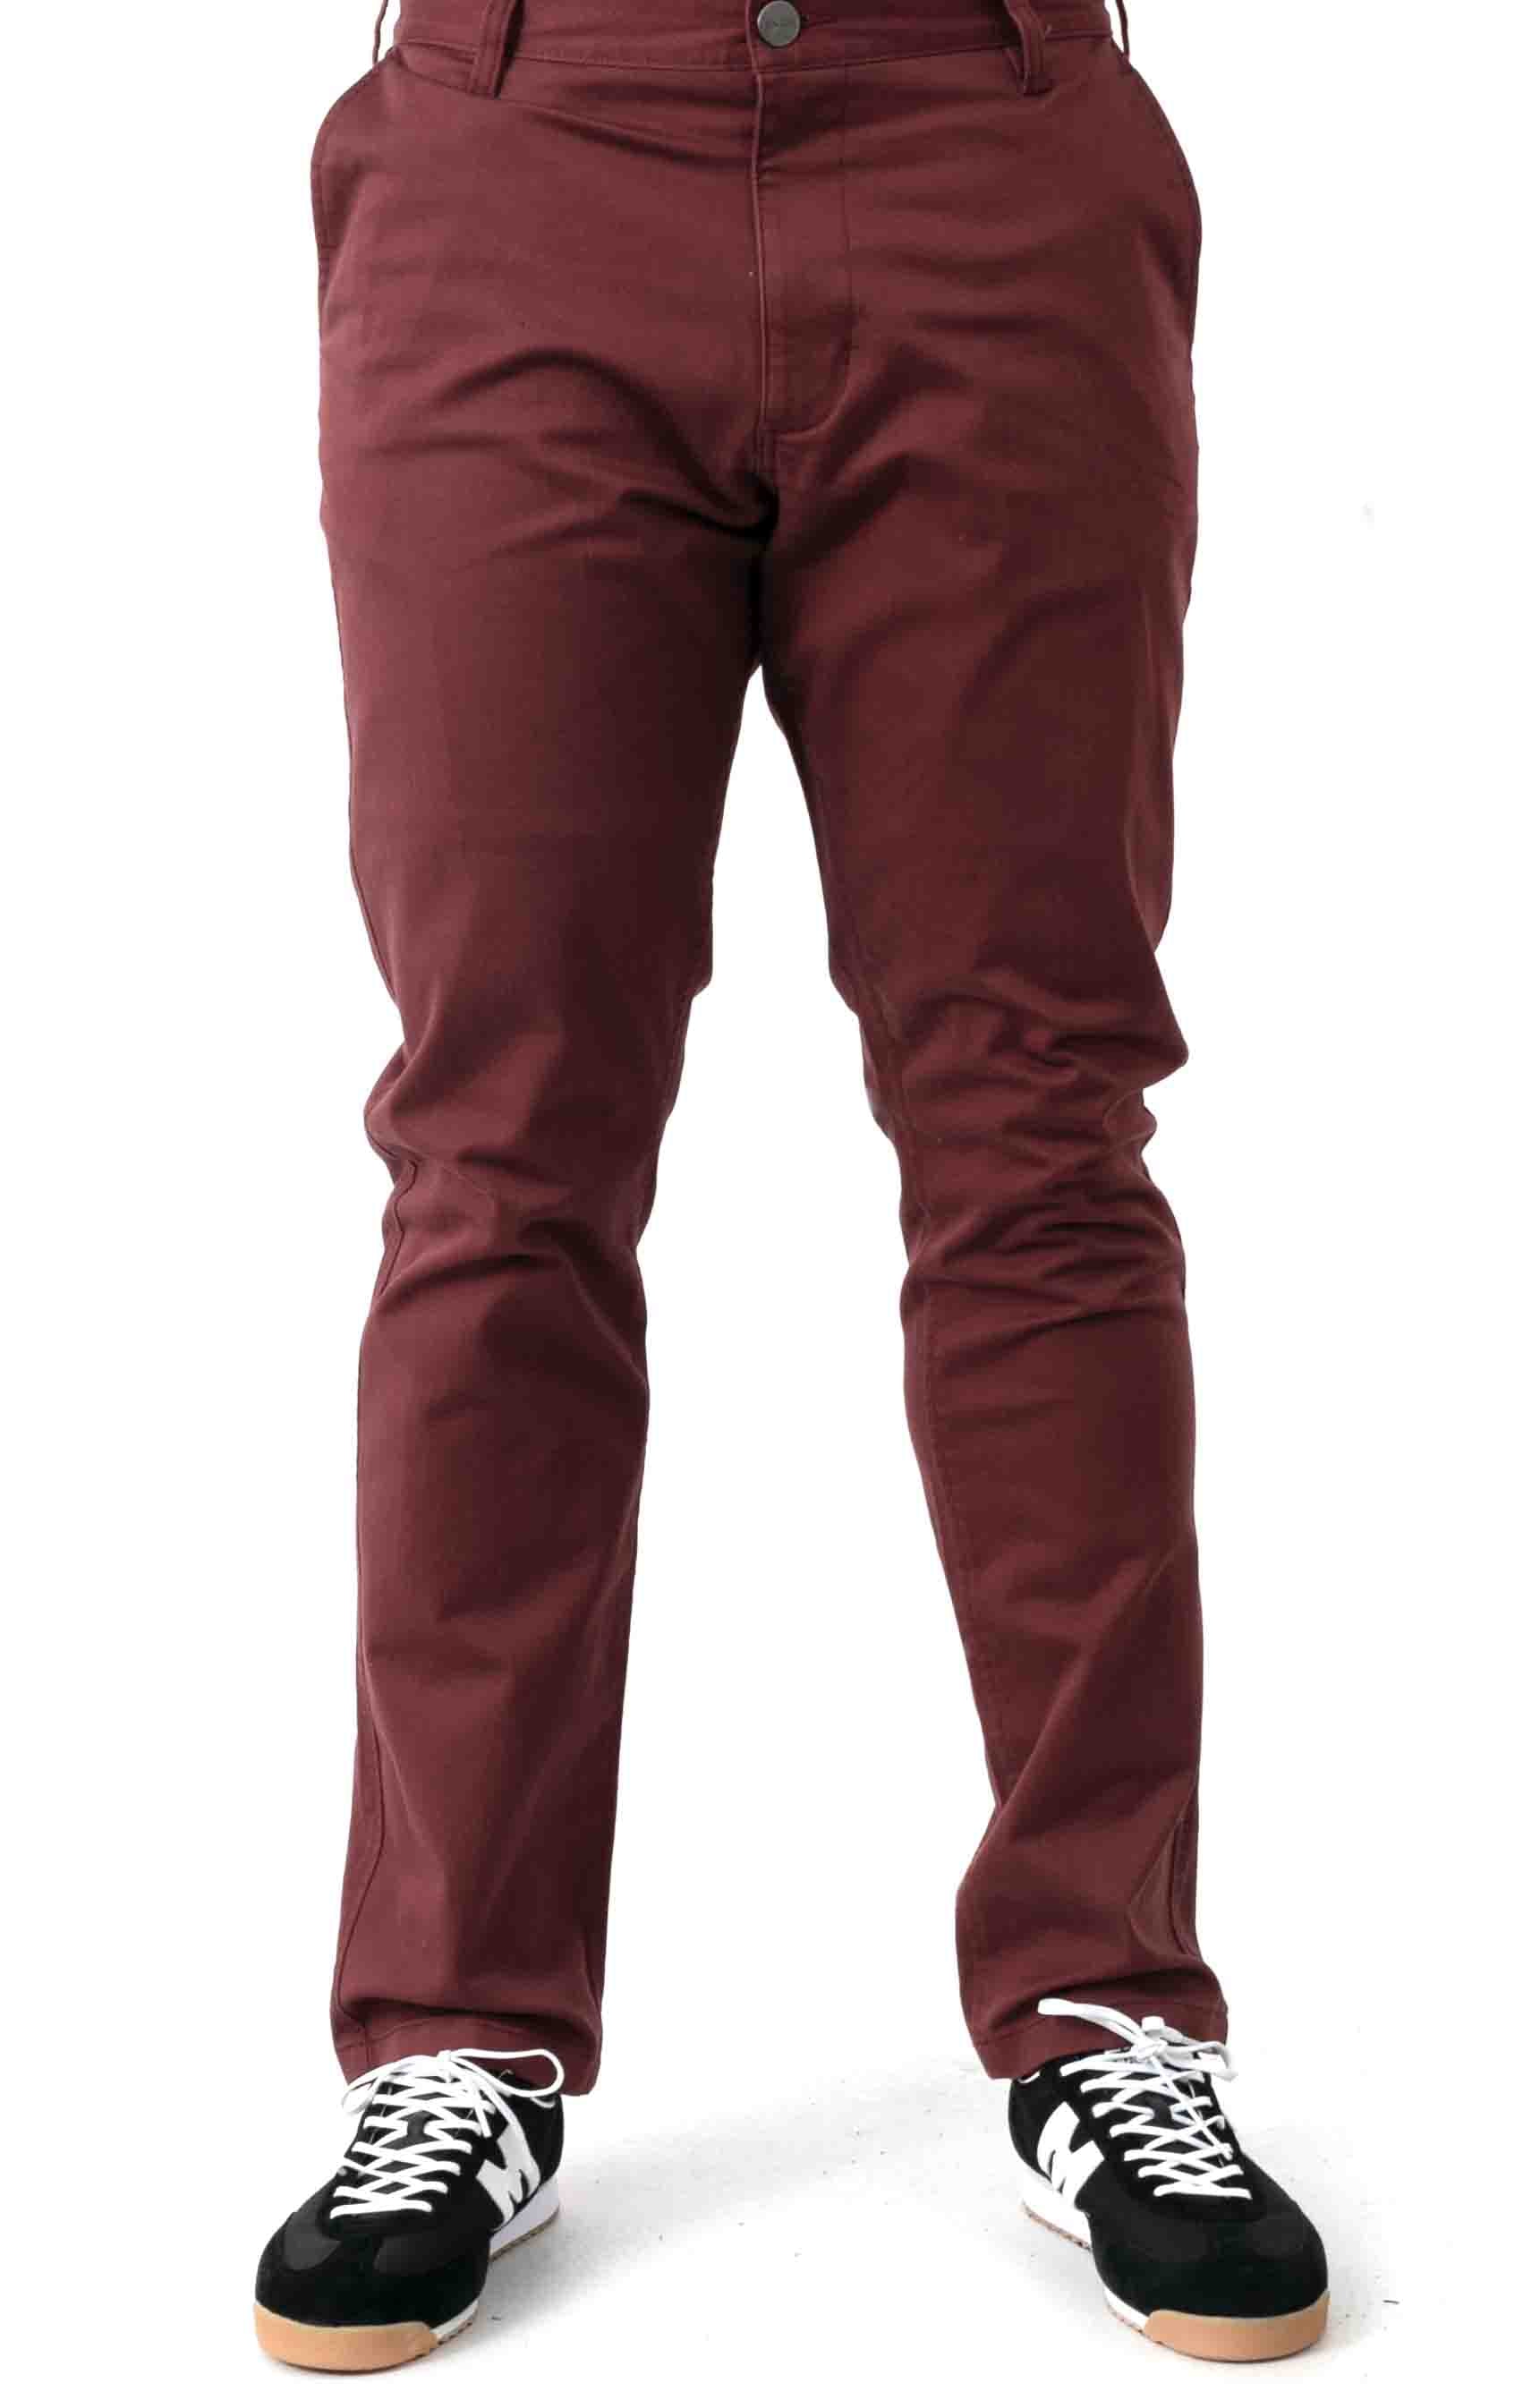 Week-End Stretch Straight Fit Pants - Oxblood Red